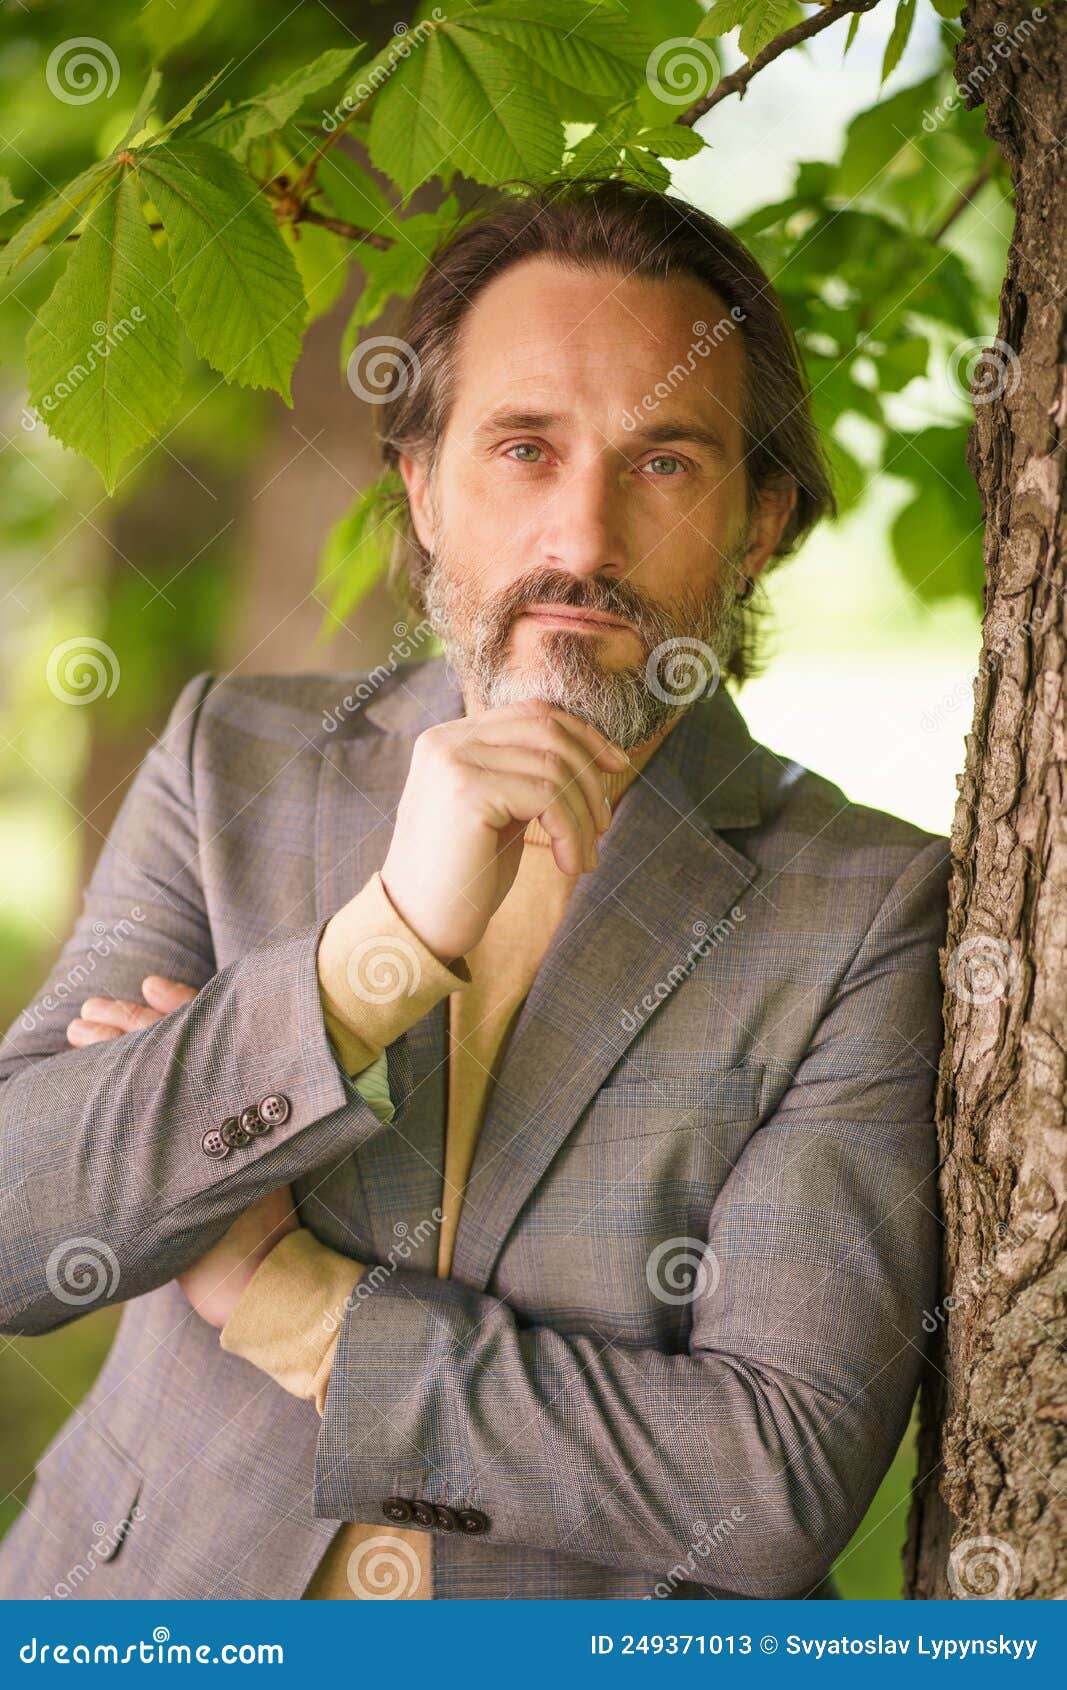 Mature Handsome Grey Birded Businessman In Casual Standing Under Tree On The Grass Looking At